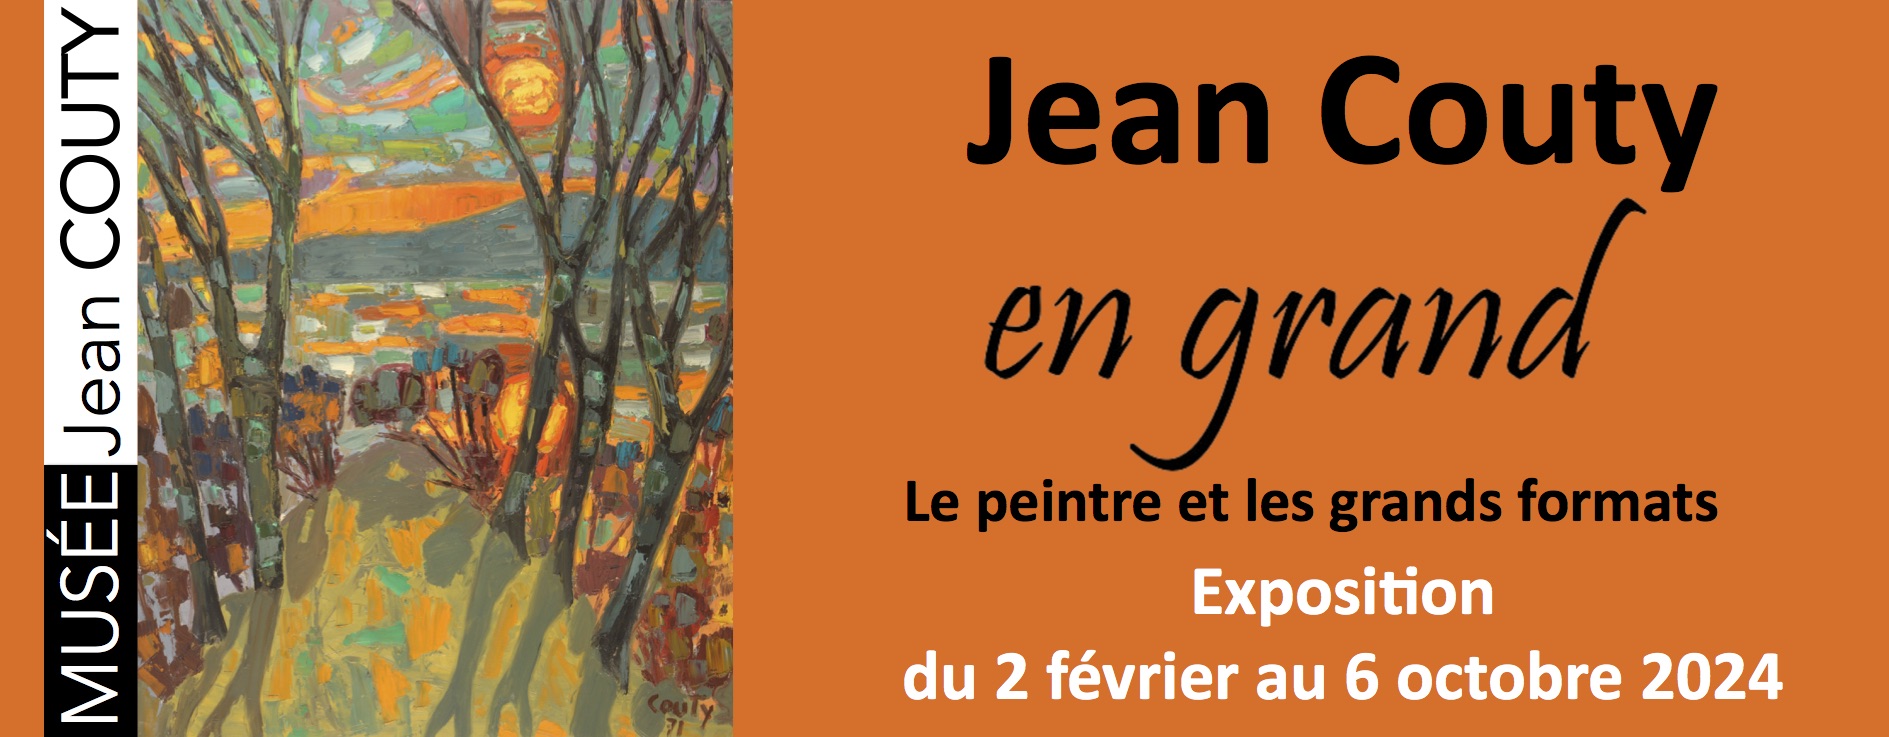 Expo Couty en grand